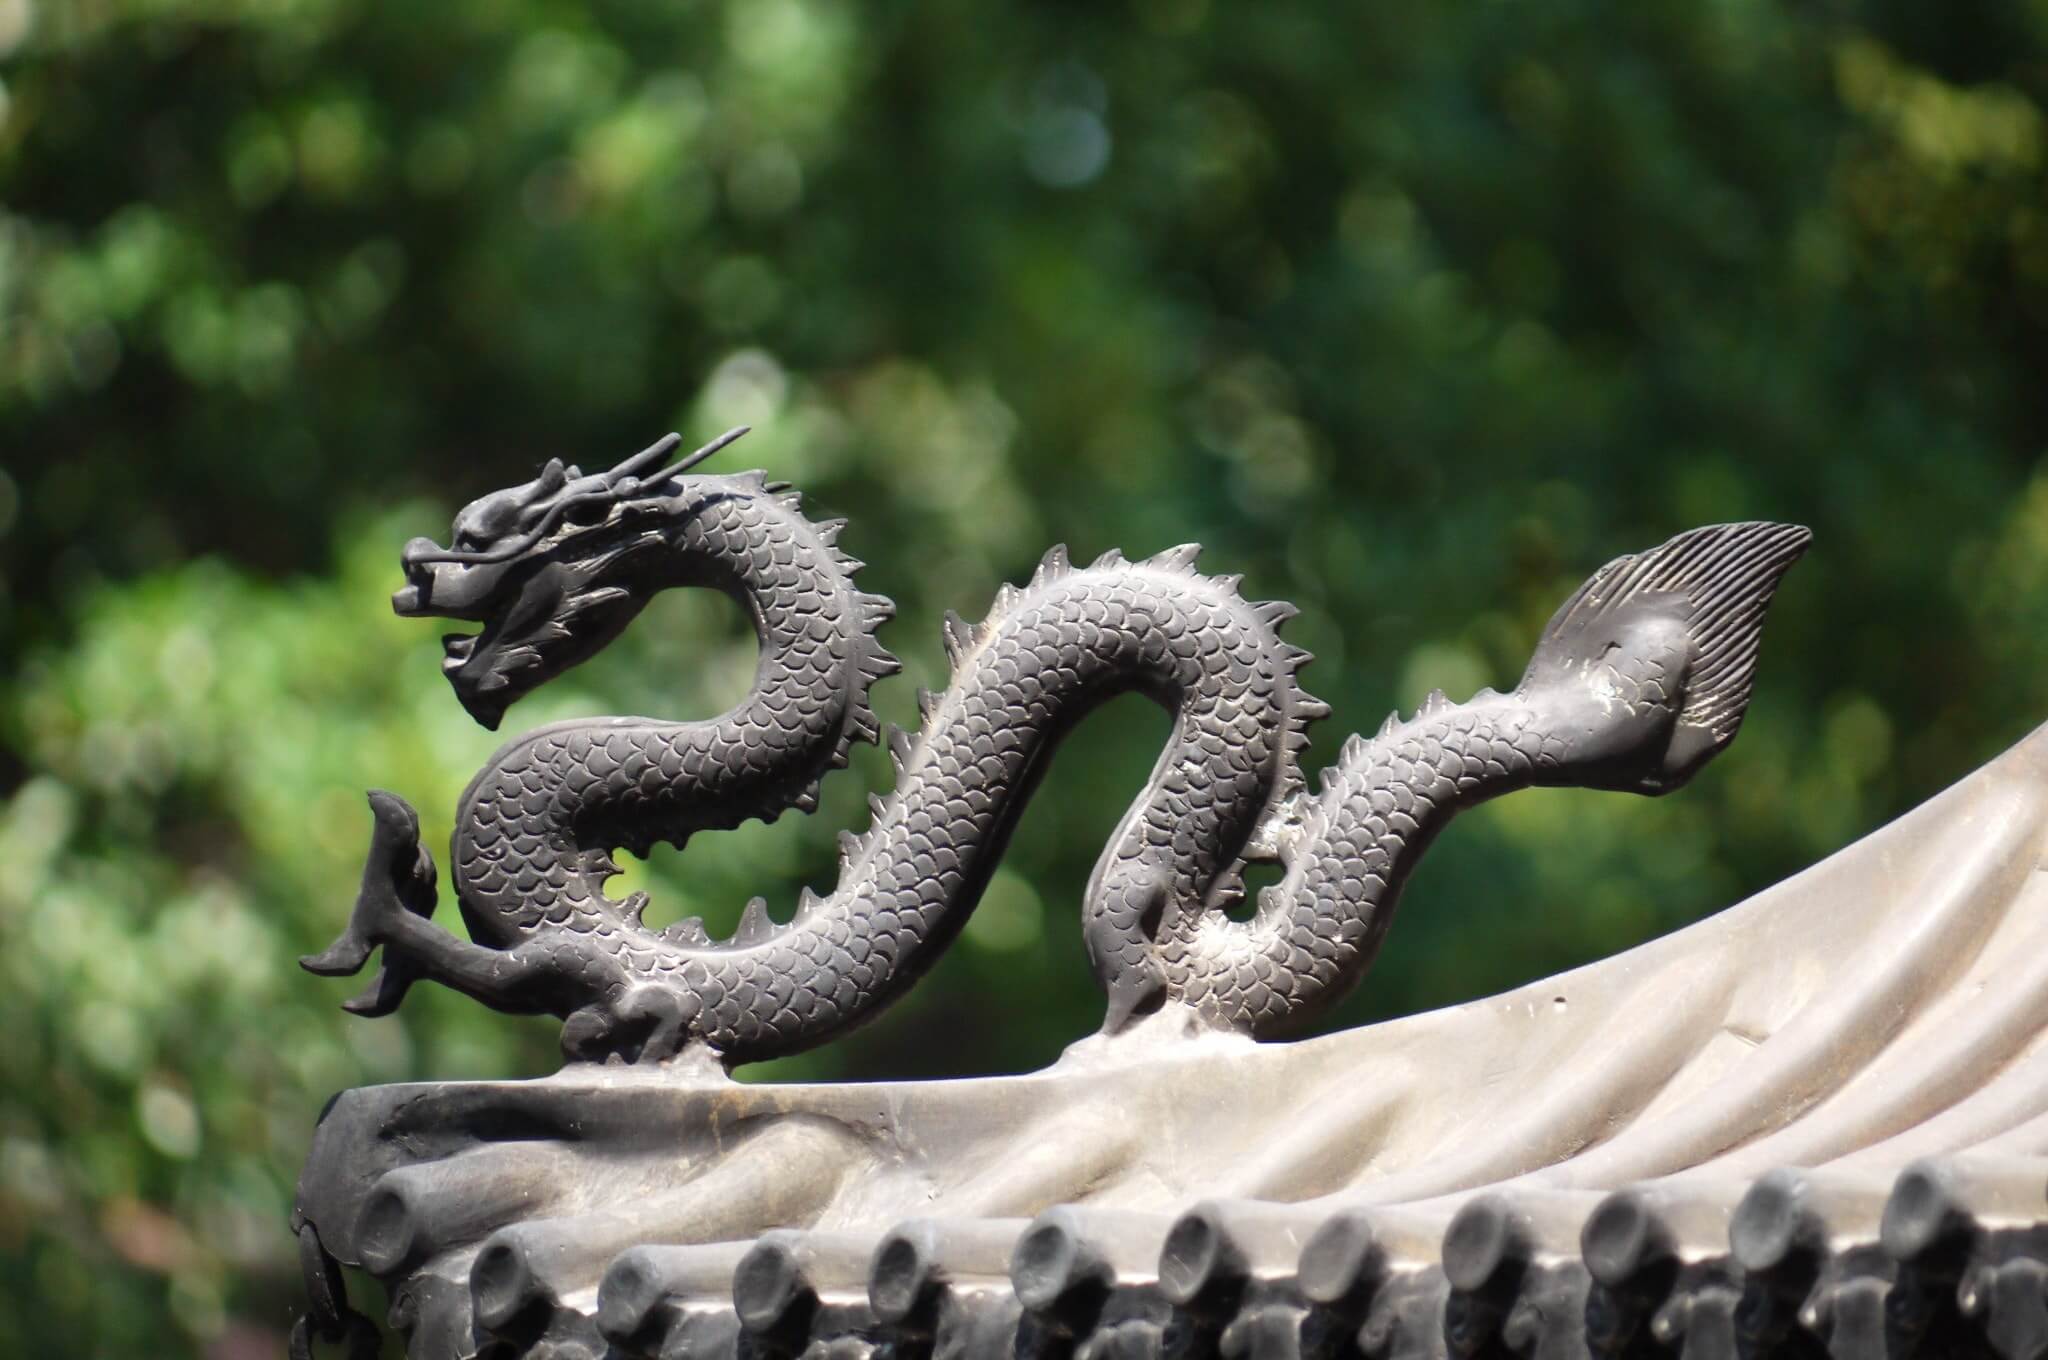 The number of startup dragons keeps climbing